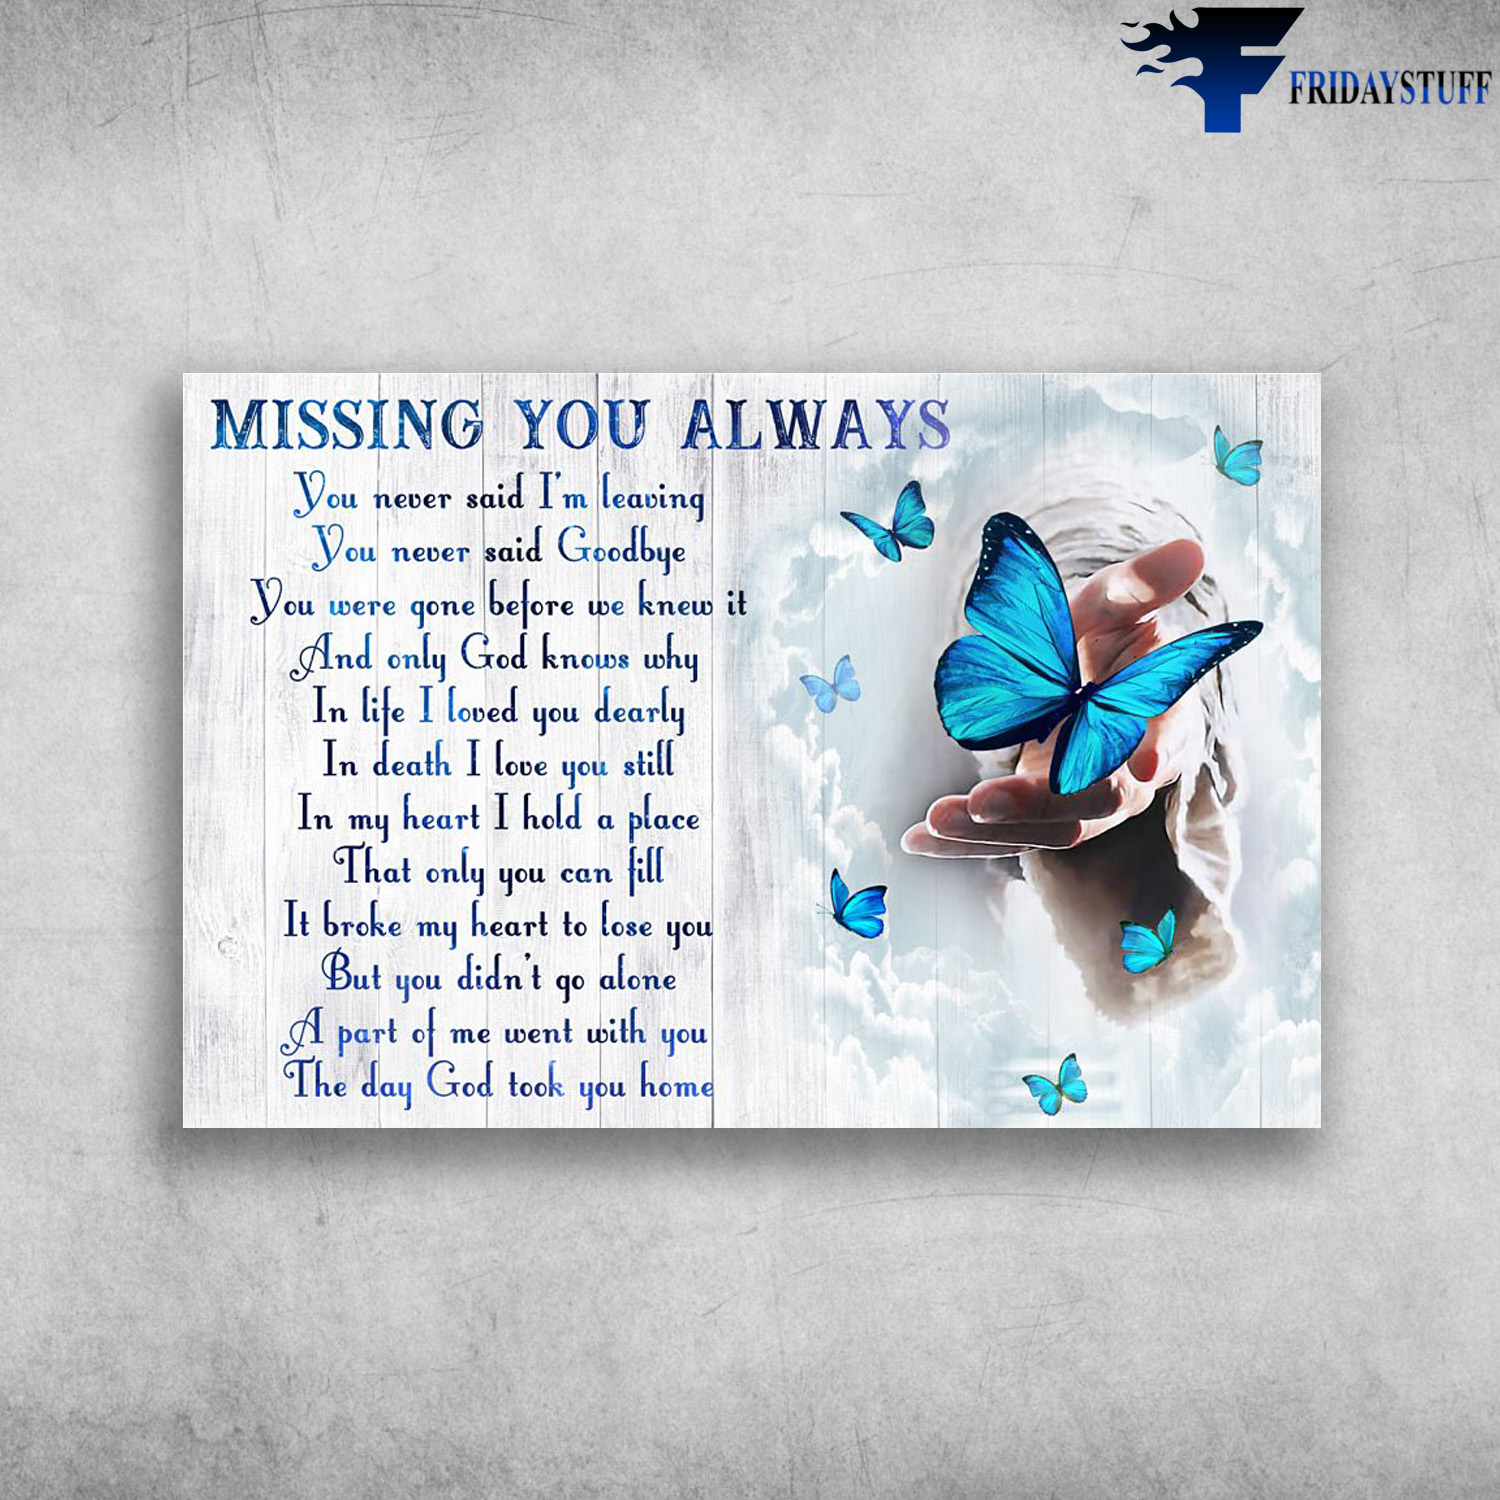 Butterfly In God Hands - Missing You Always, You Never Said I'm Leaving, You Never Said Goodbye, You Were Gone Before We Knew It, And Only God Knows Why, In Life I Loved You Dearly, In Death I Love You Still, In My Heart I Hold A Place